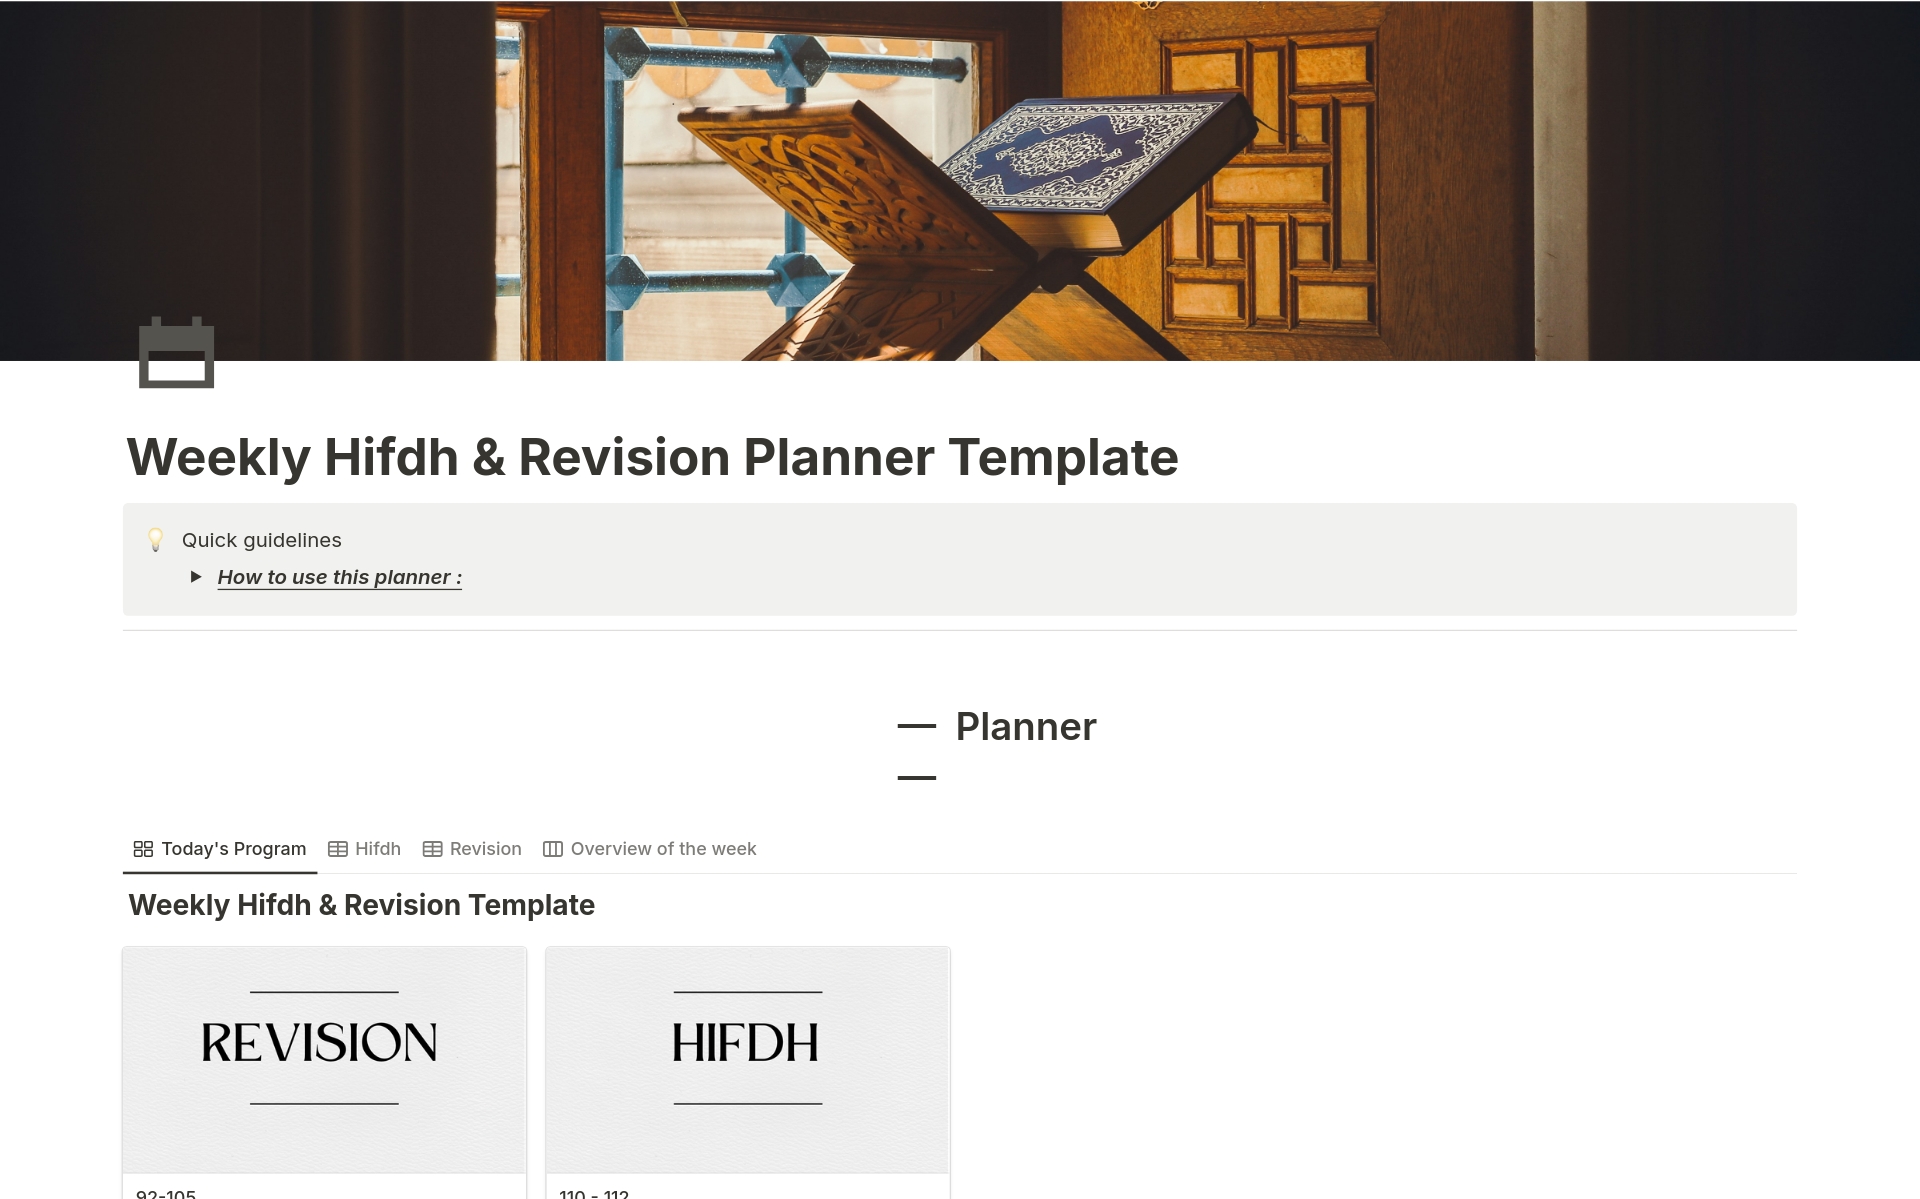 A template preview for Weekly Hifdh & Revision Planner